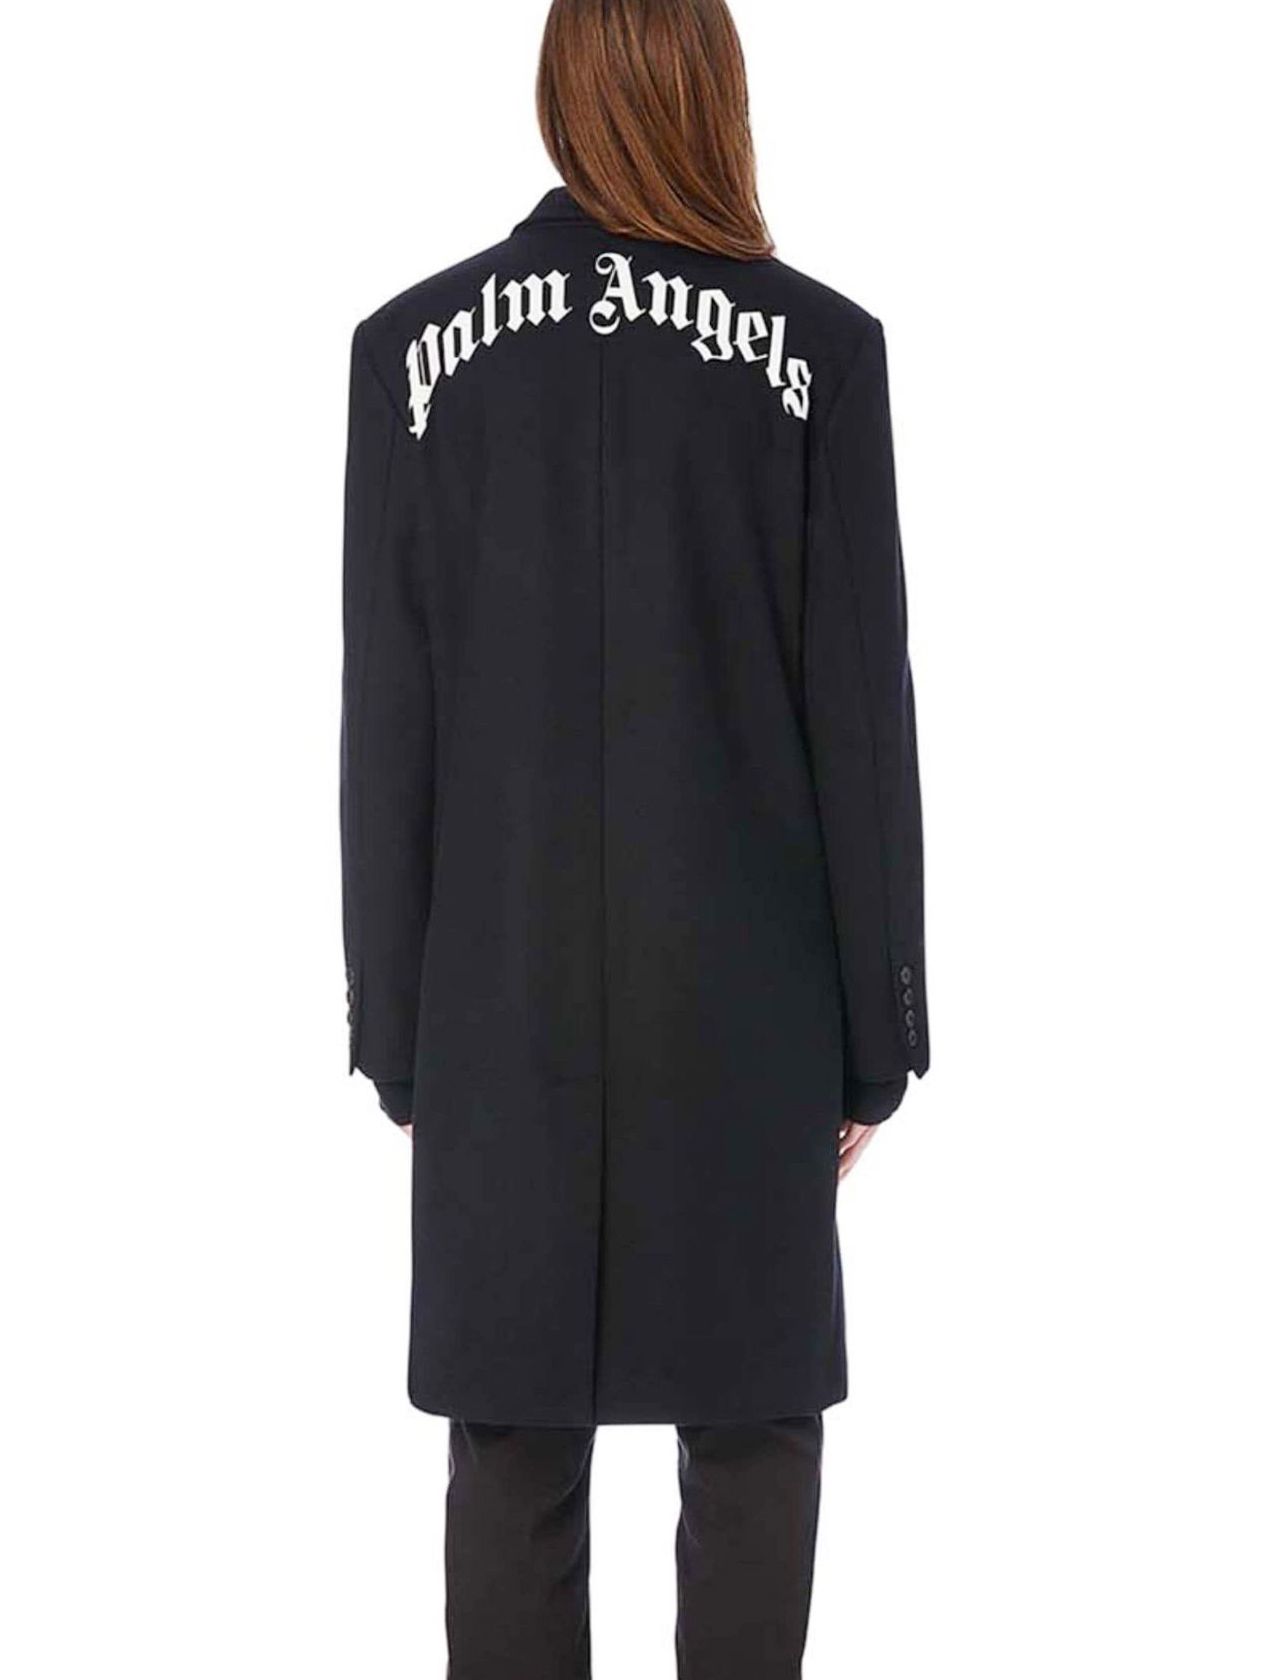 PALM ANGELS - 2020 AW | STORY